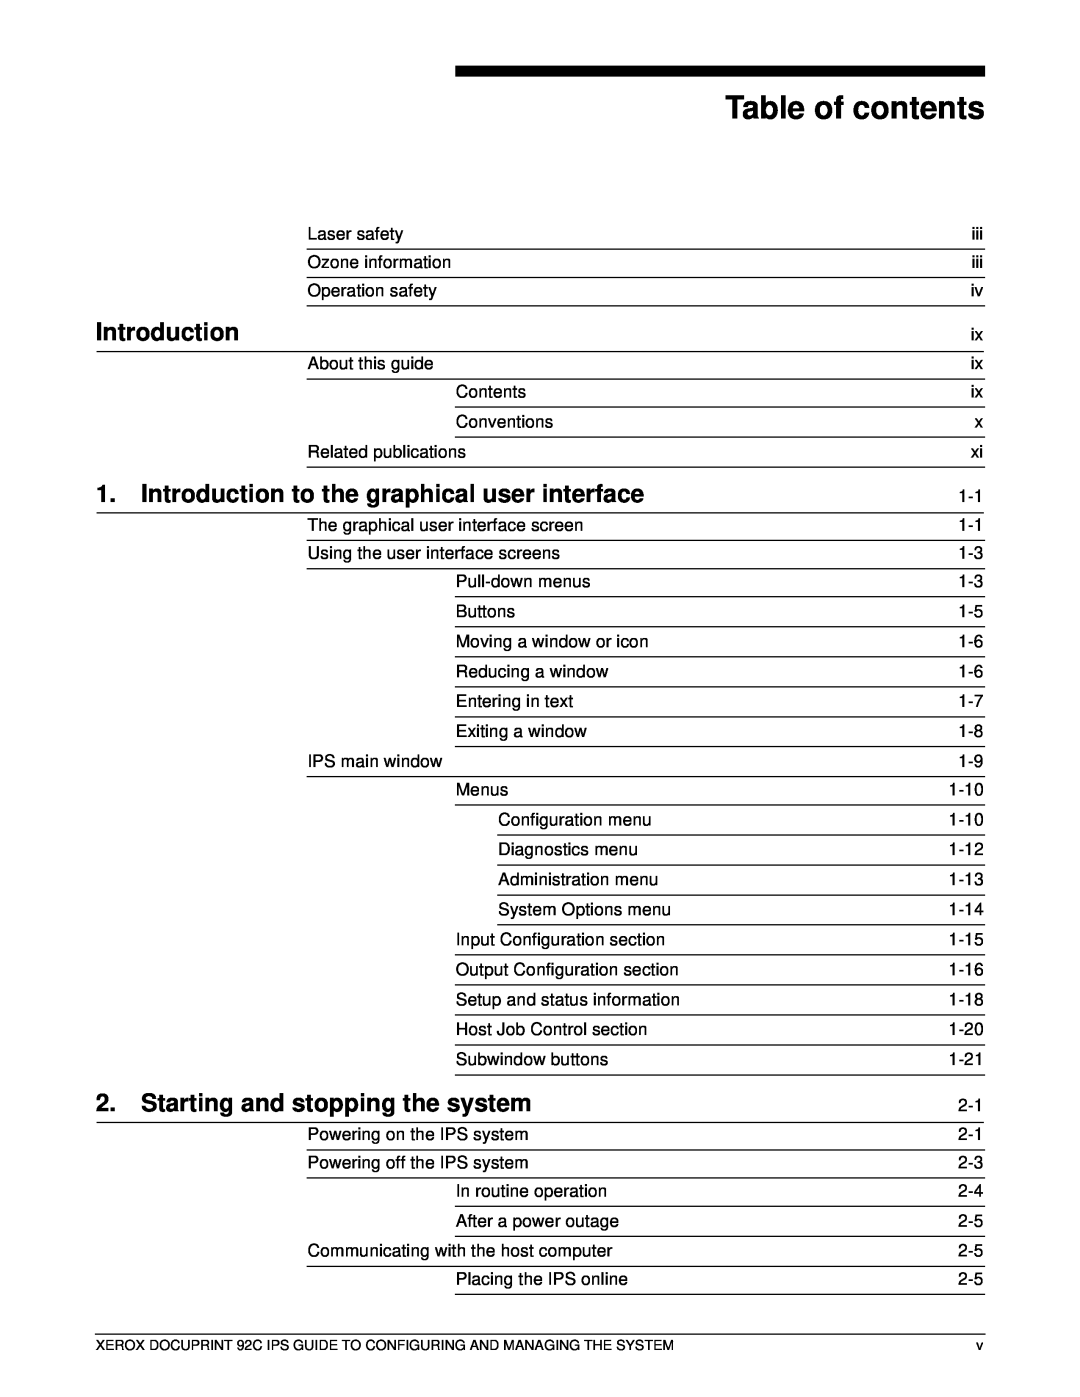 Xerox 92C IPS manual Table of contents, Introduction to the graphical user interface, Starting and stopping the system 